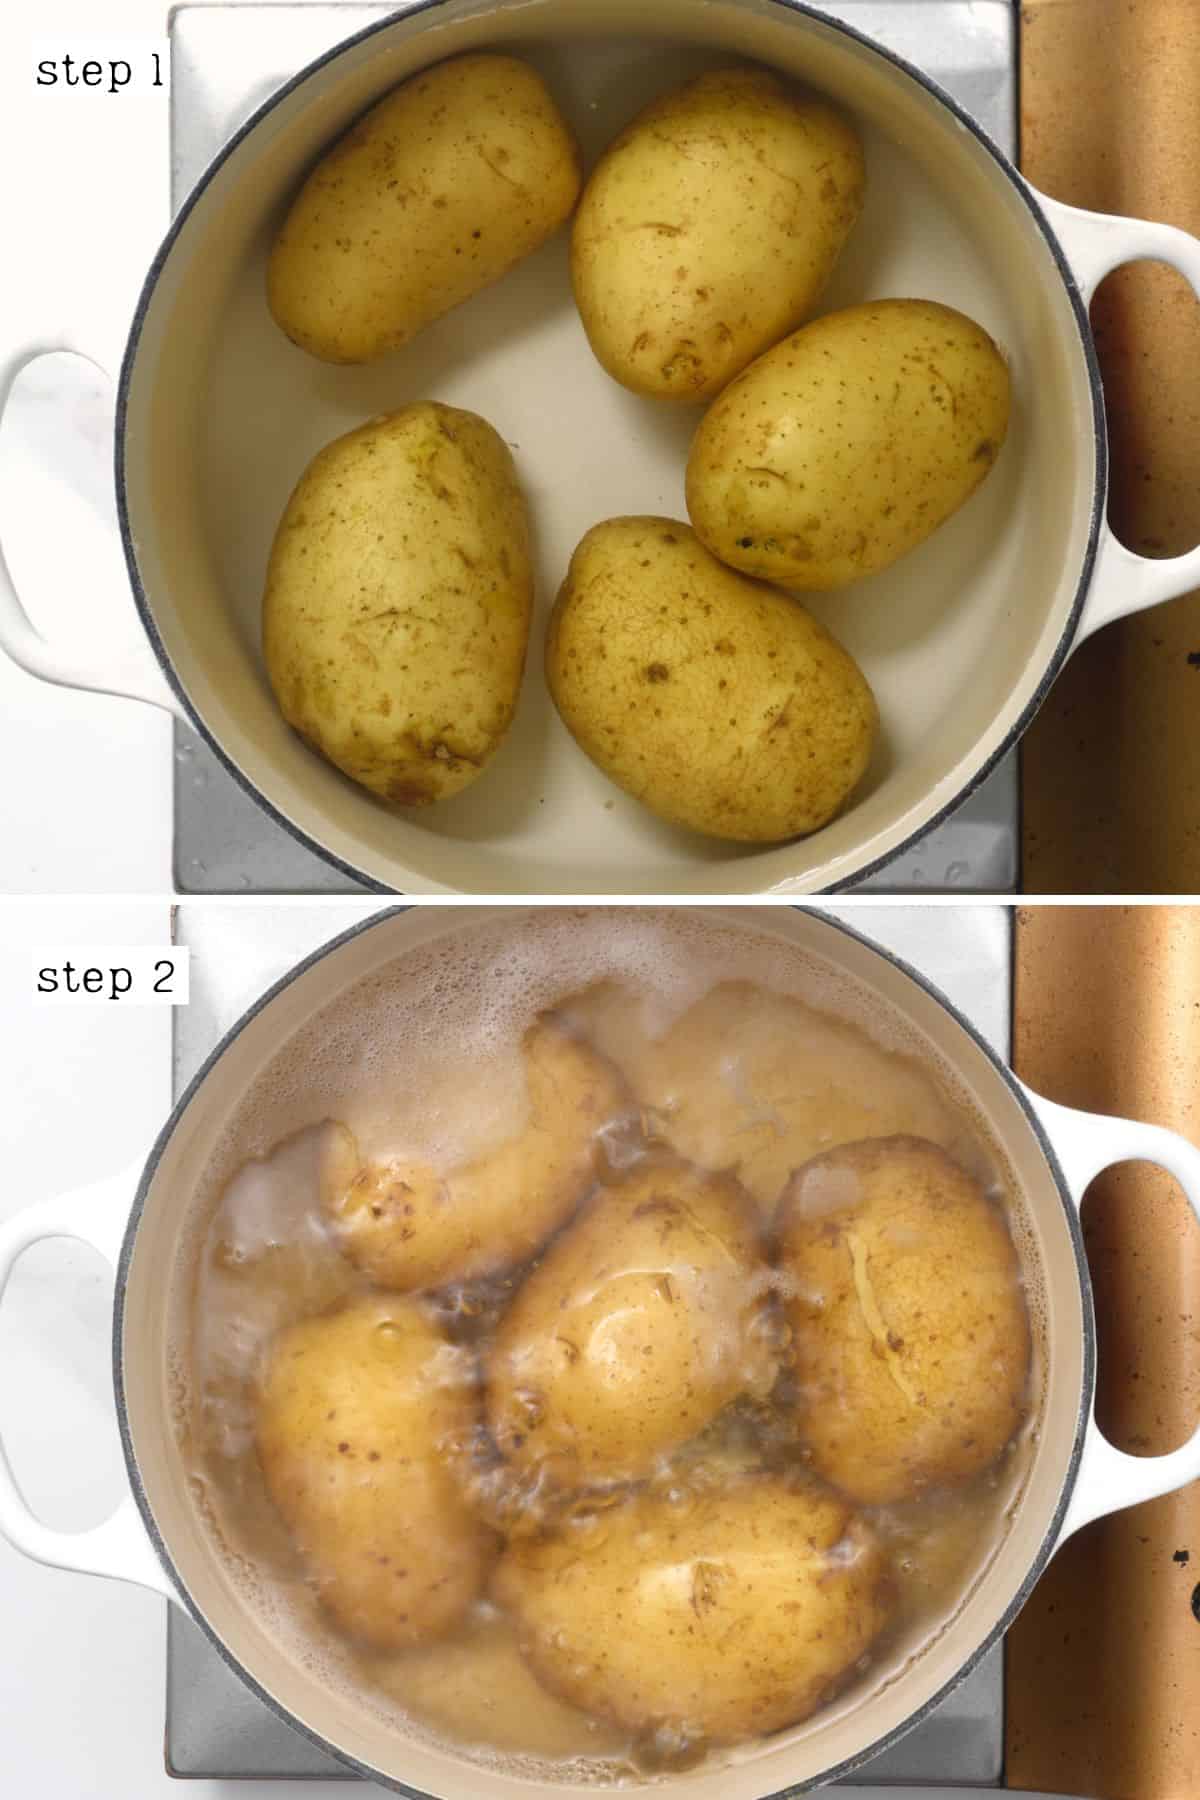 Steps for boiling large potatoes